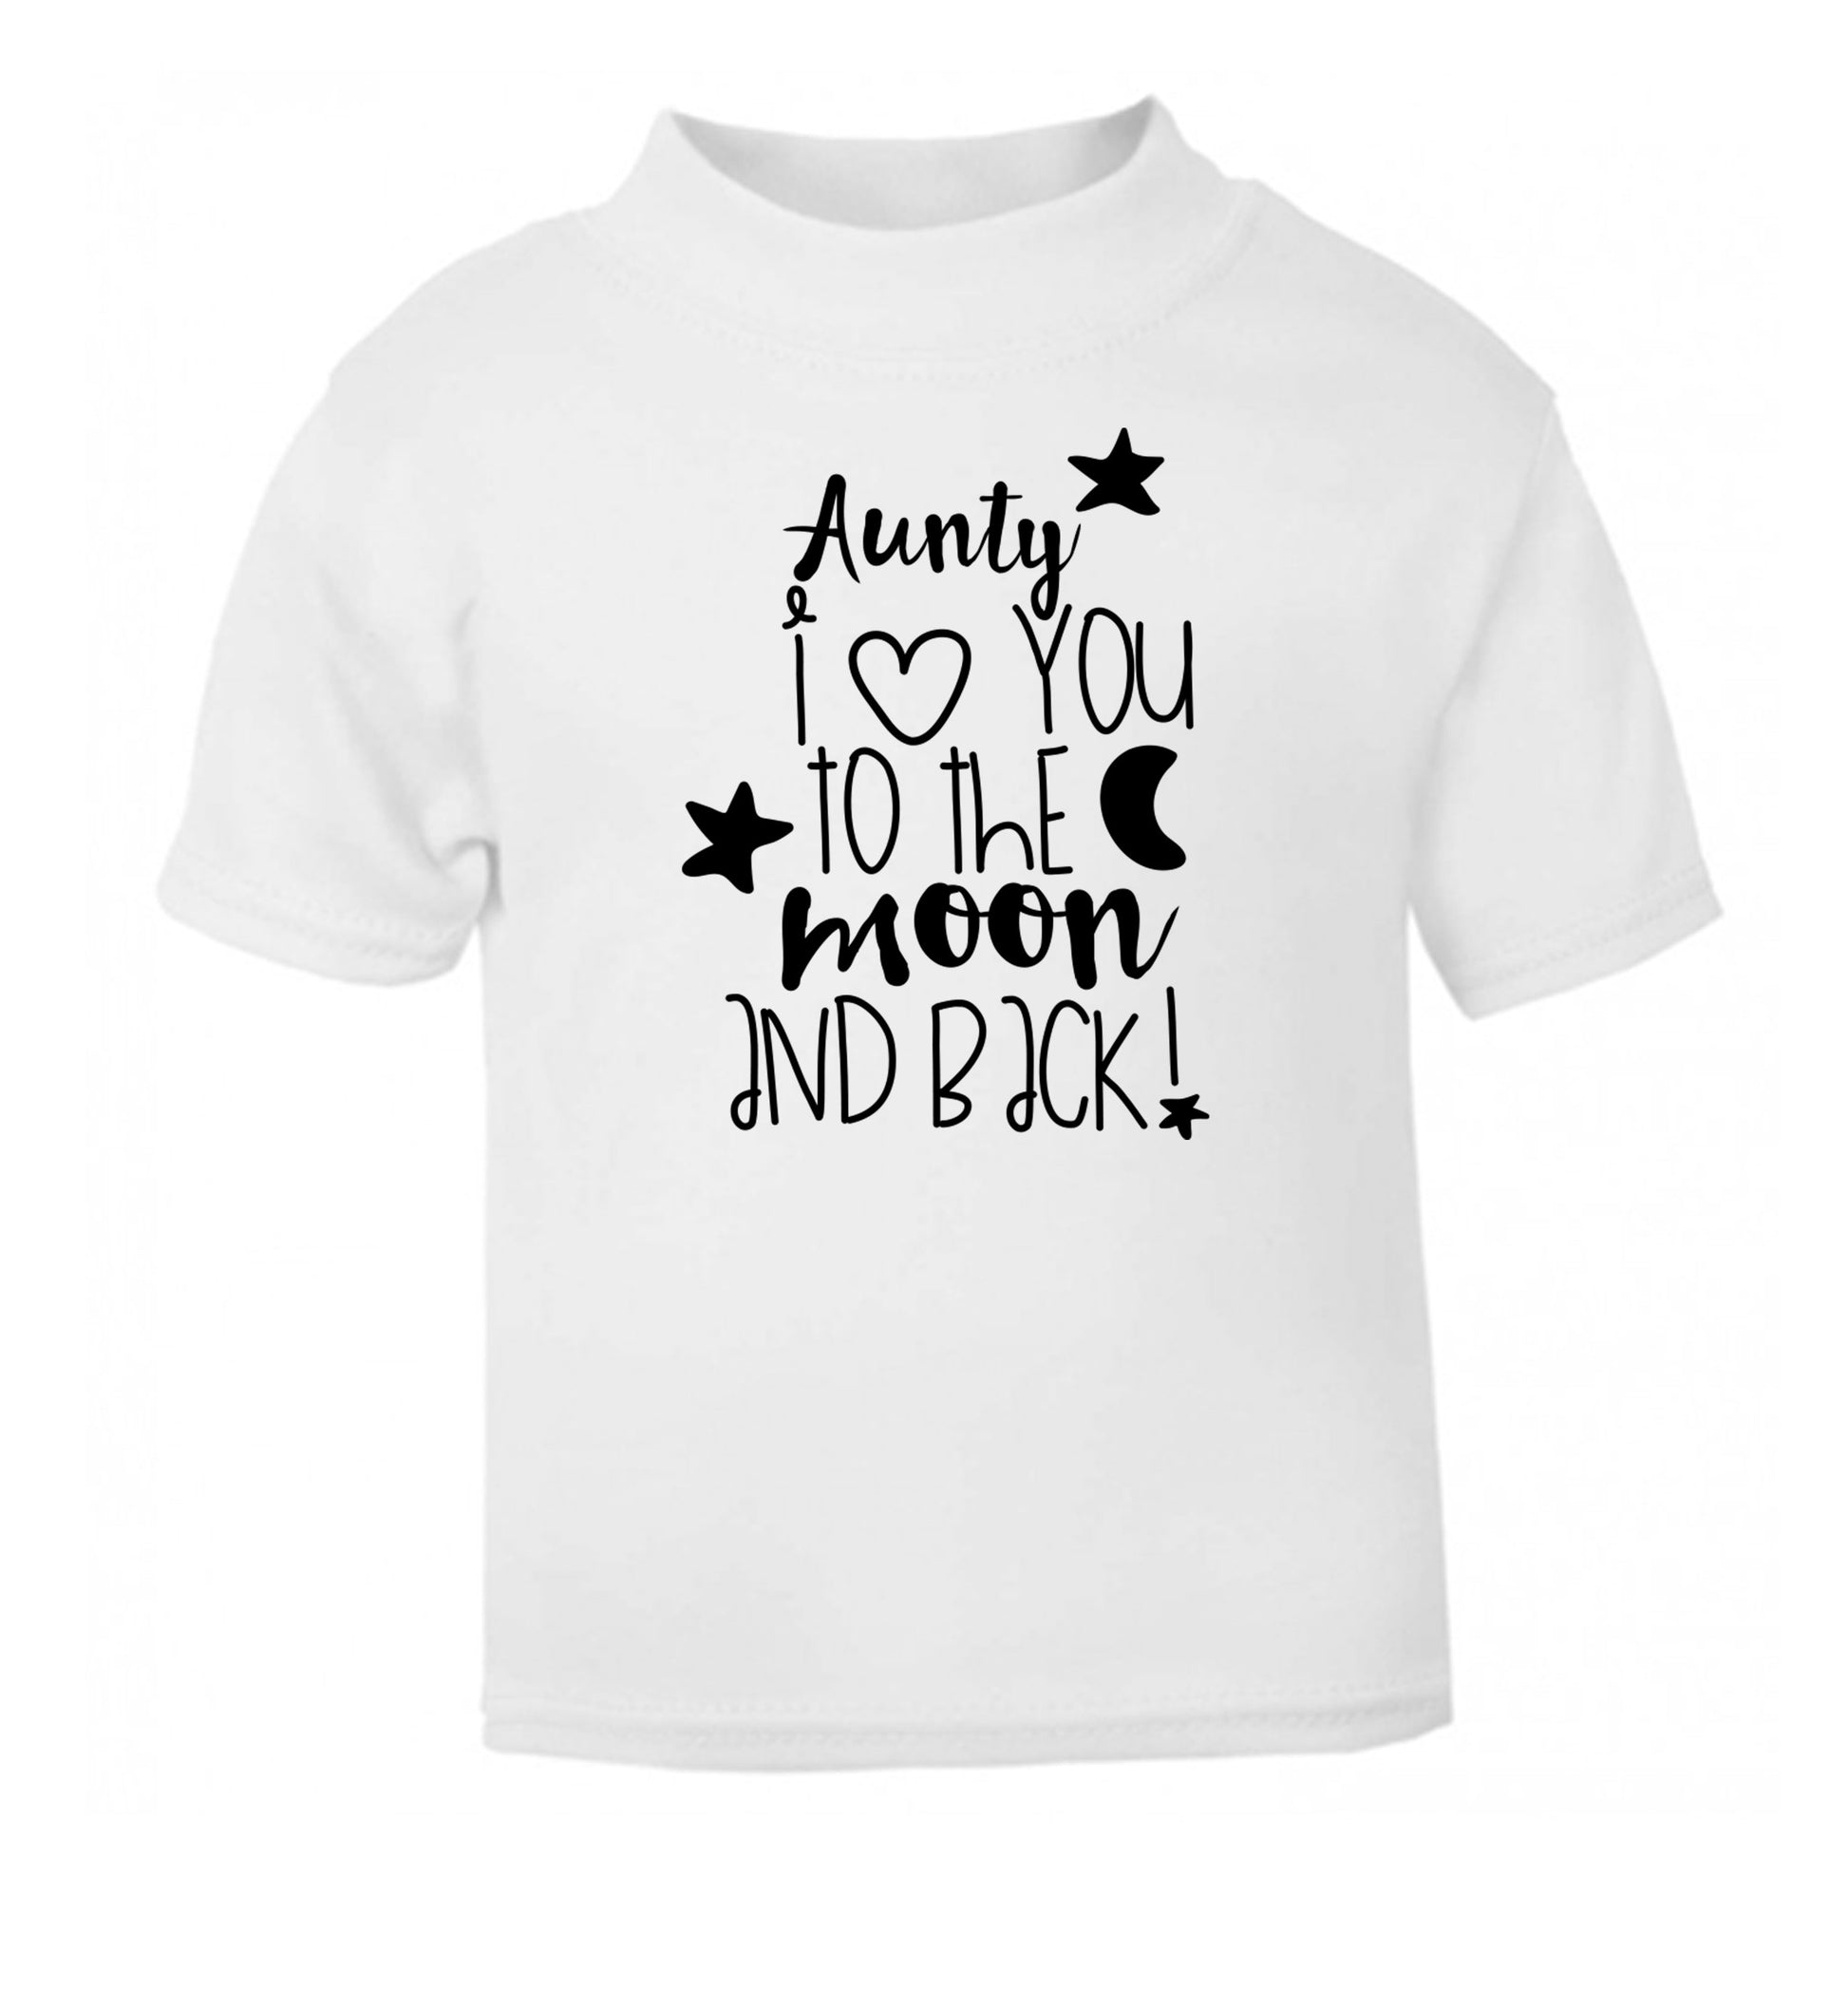 Aunty I love you to the moon and back white Baby Toddler Tshirt 2 Years